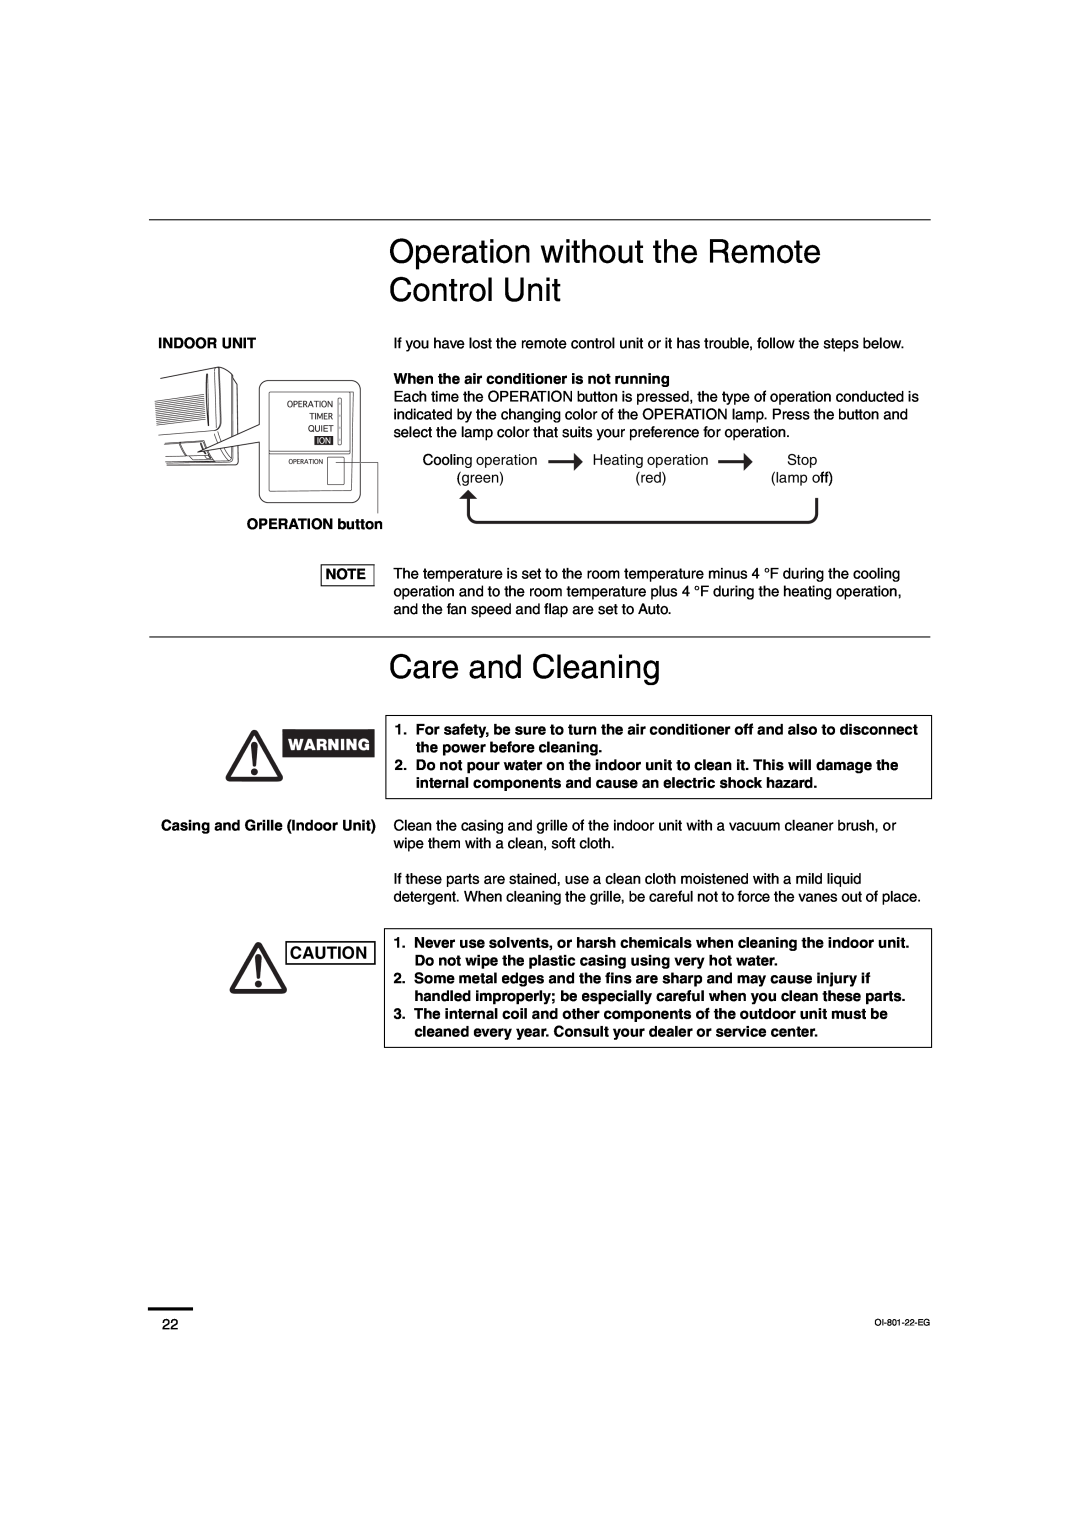 Sanyo CH2472, CH1872 service manual Operation without the Remote Control Unit, Care and Cleaning 